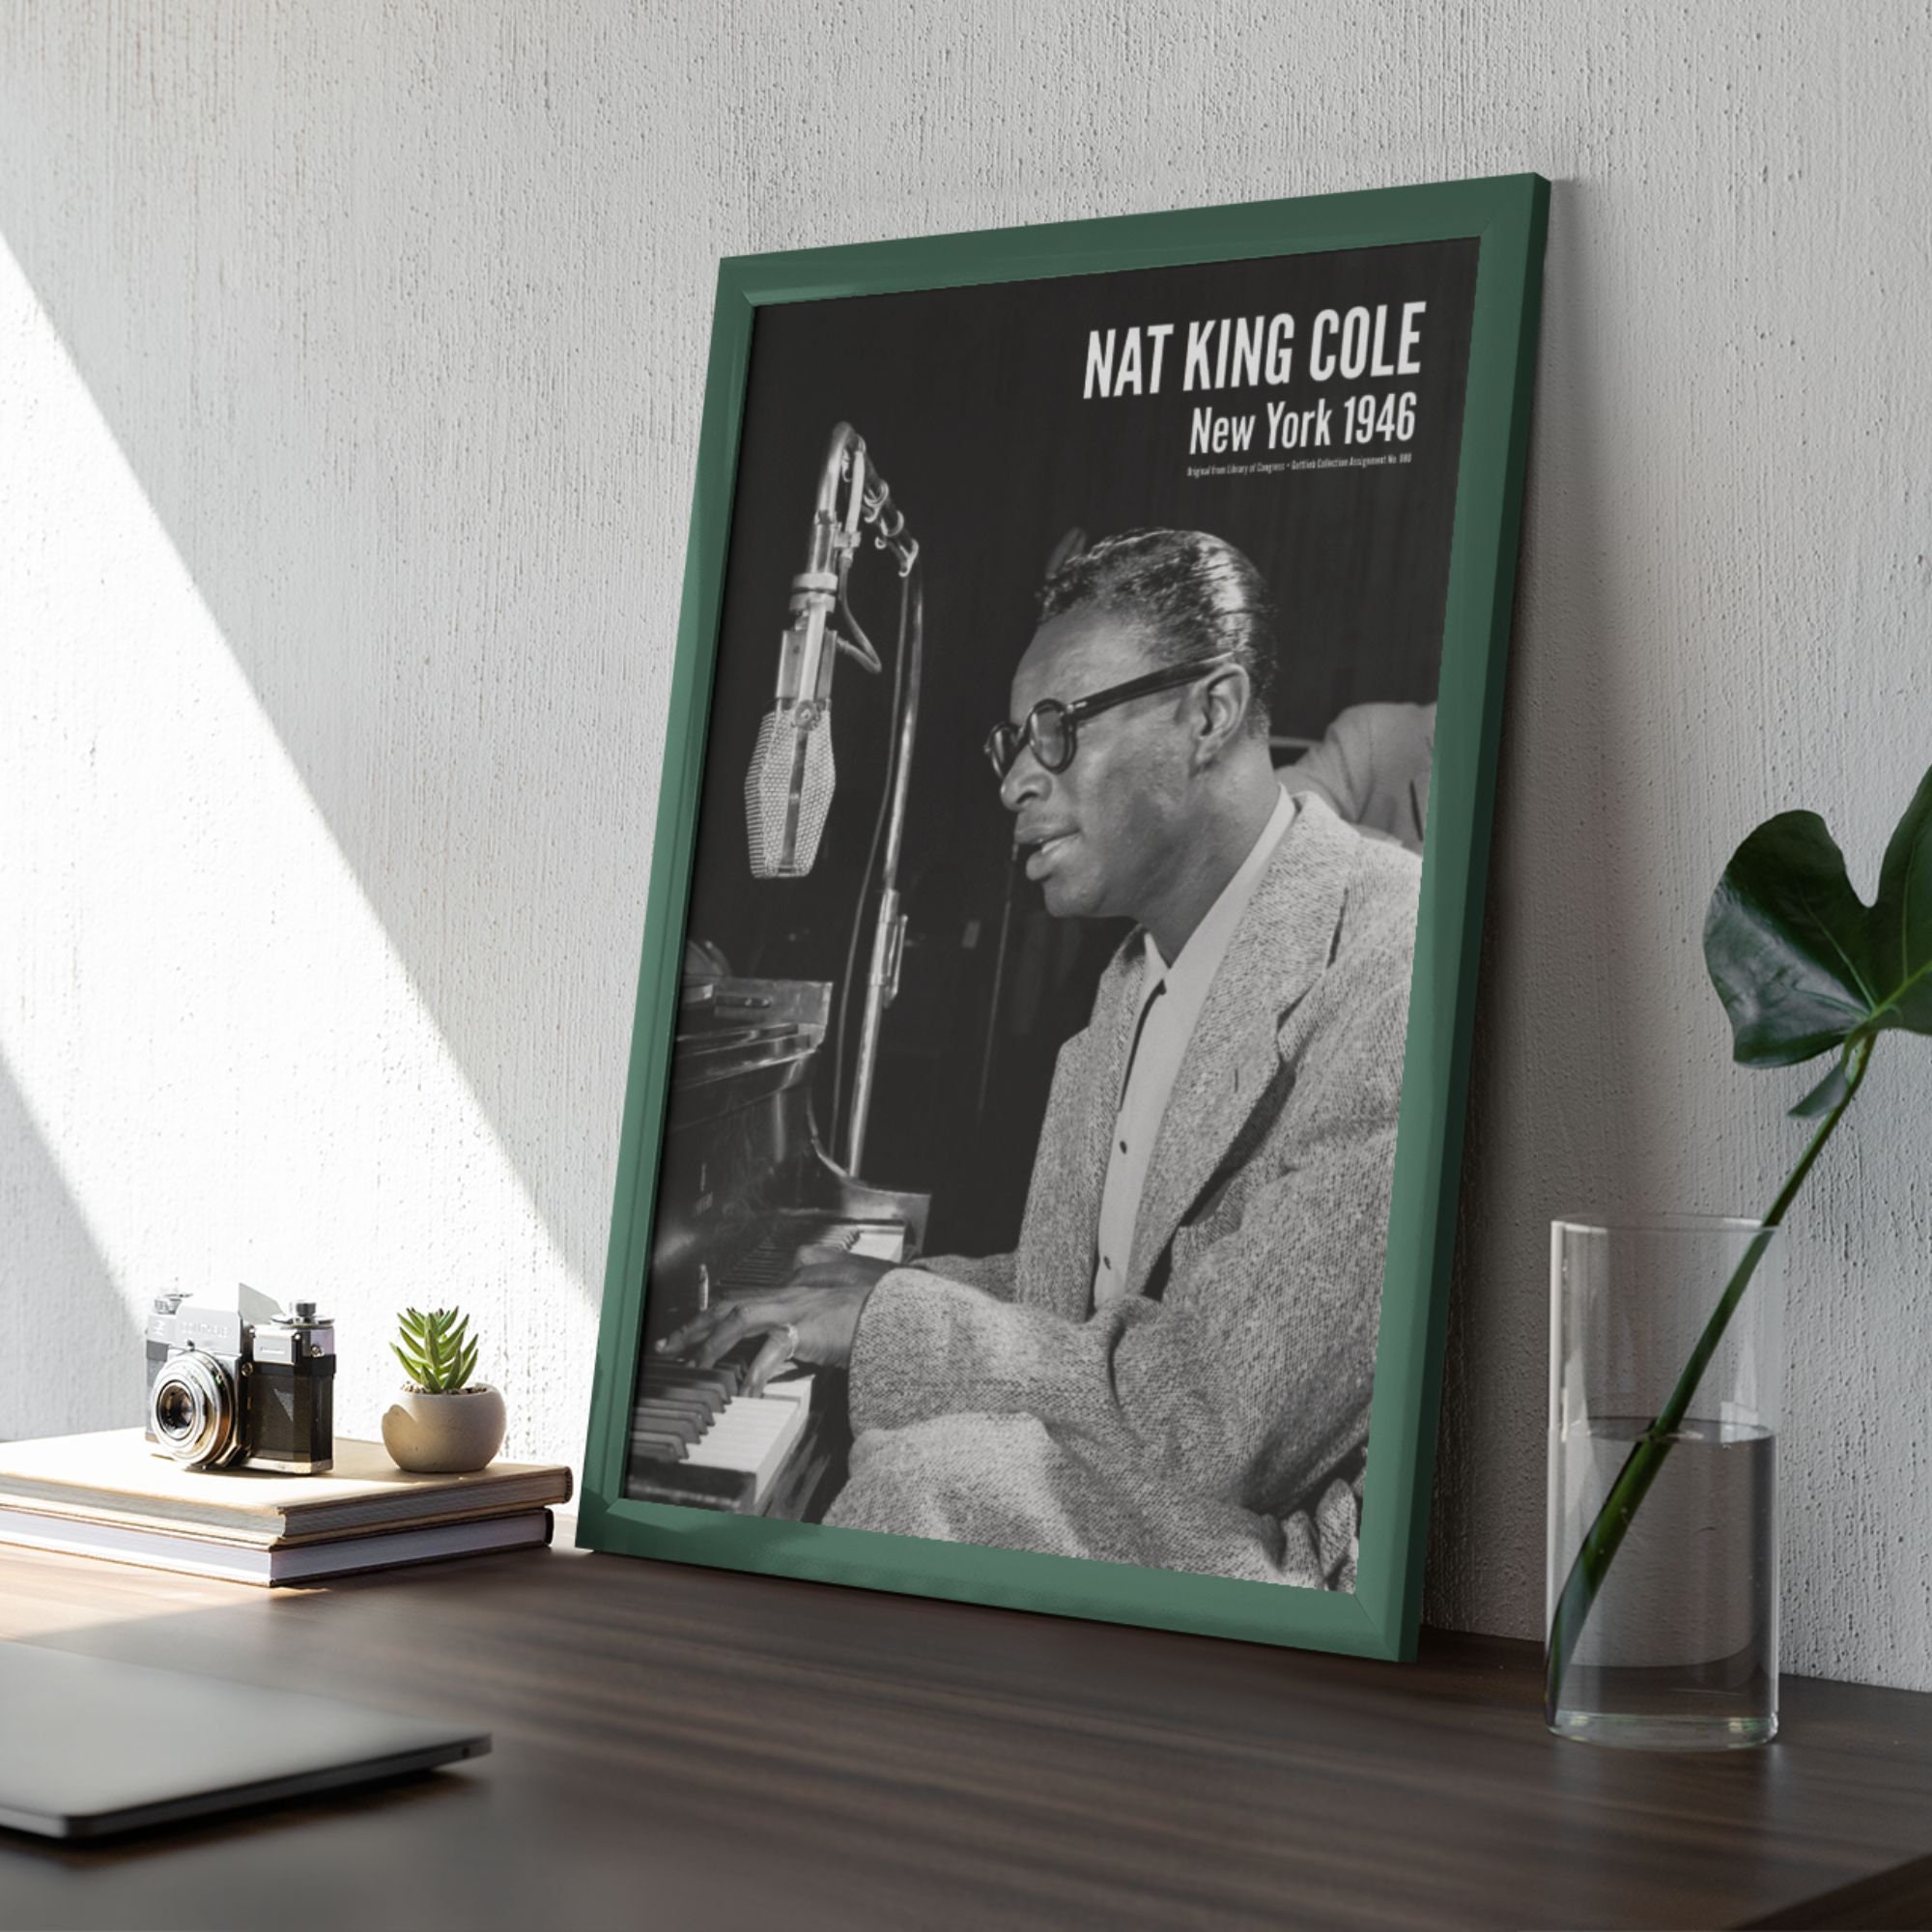 Nat King Cole Jazz Poster: A Unique Music Gift Perfect for